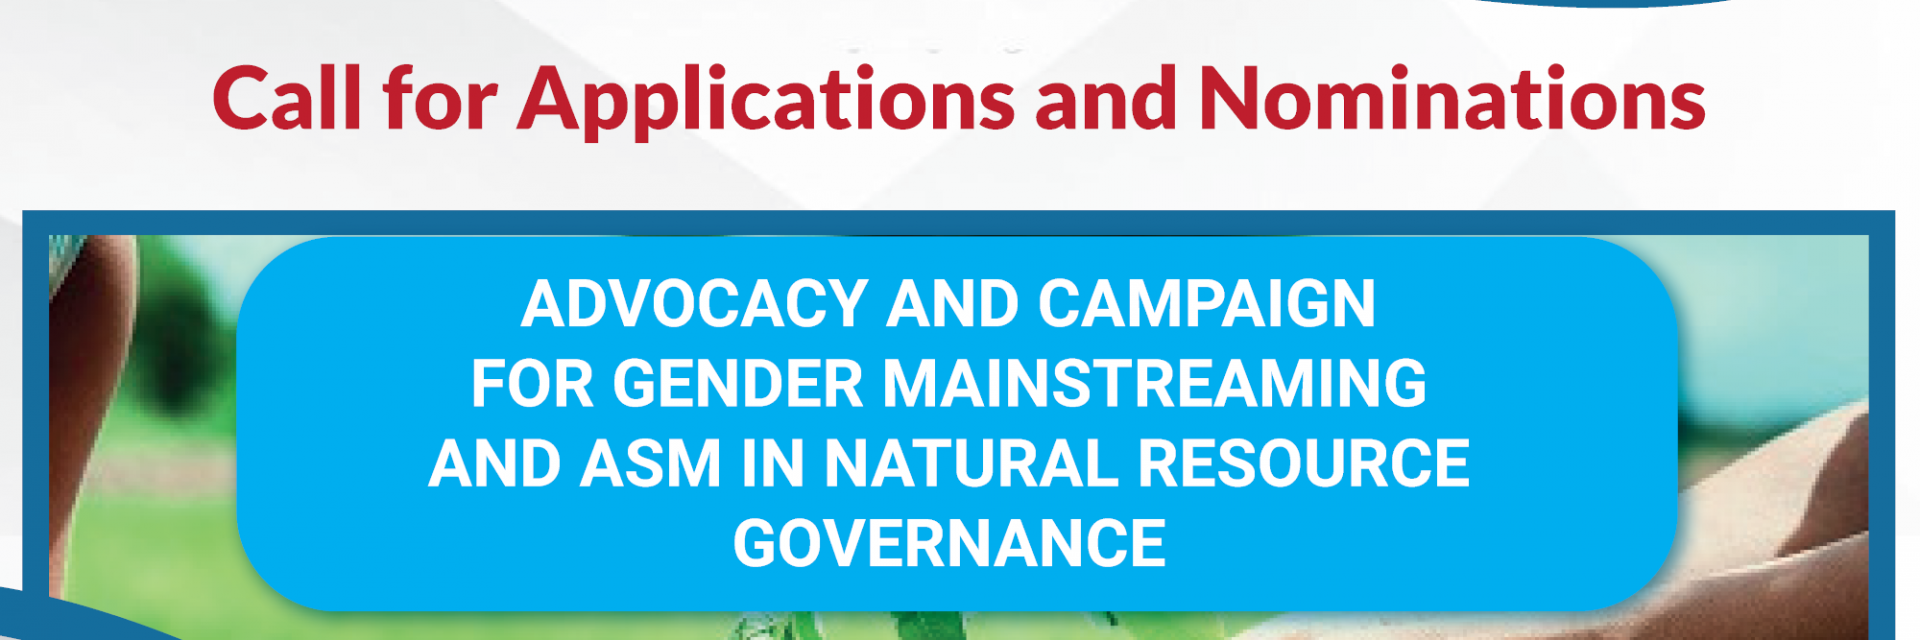 Advocacy and campaign for gender mainstreaming and ASM in natural resource governance